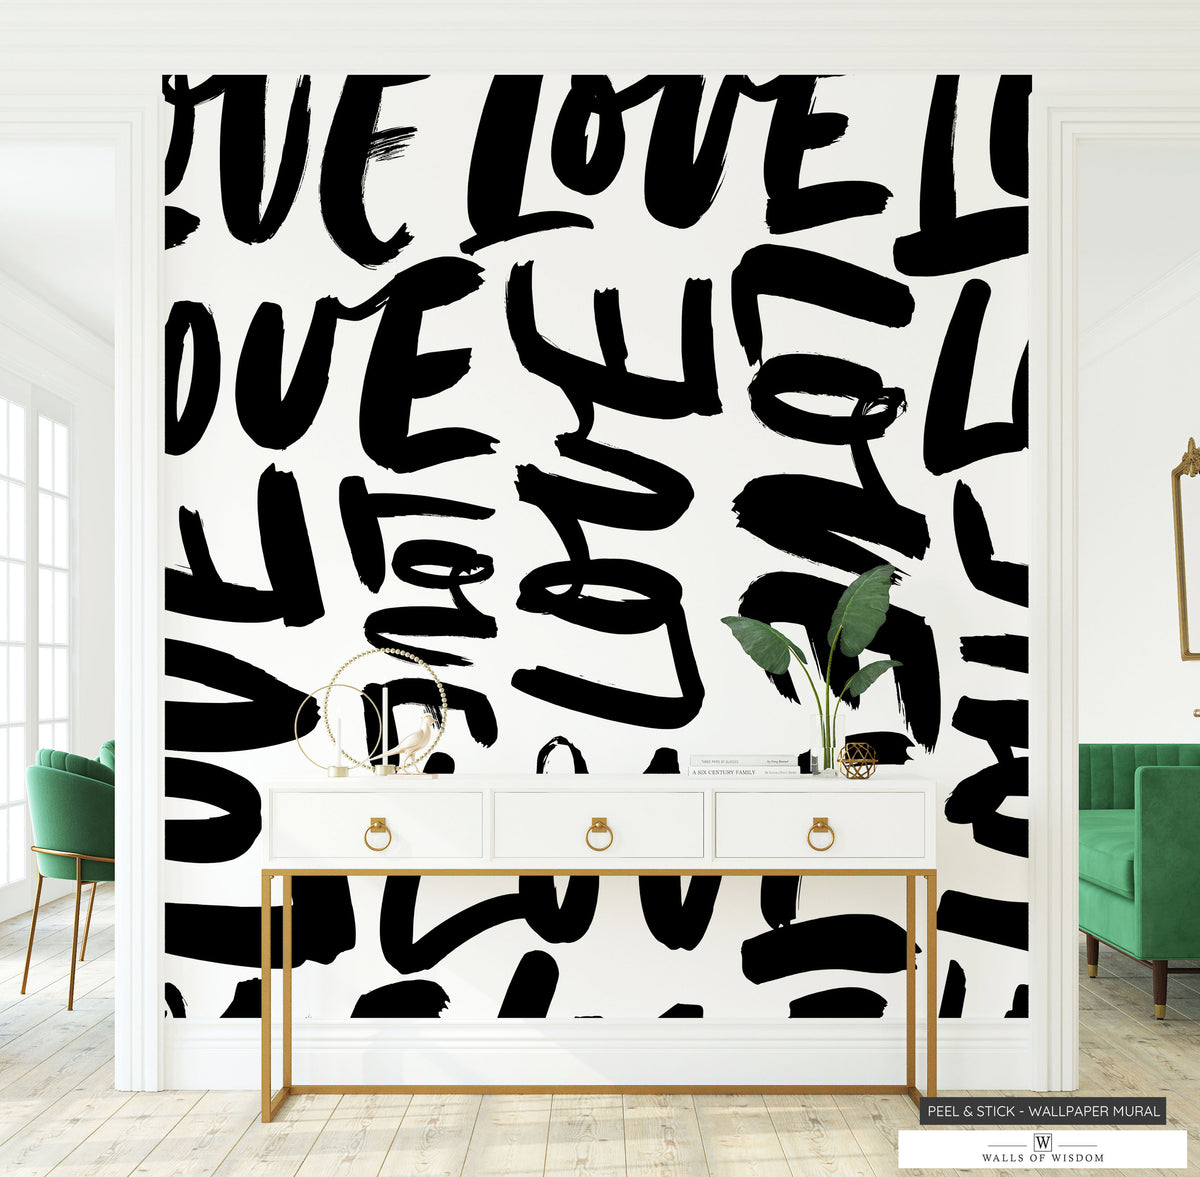 Contemporary 'Love' Typography Wallpaper Mural in black and white for statement walls.